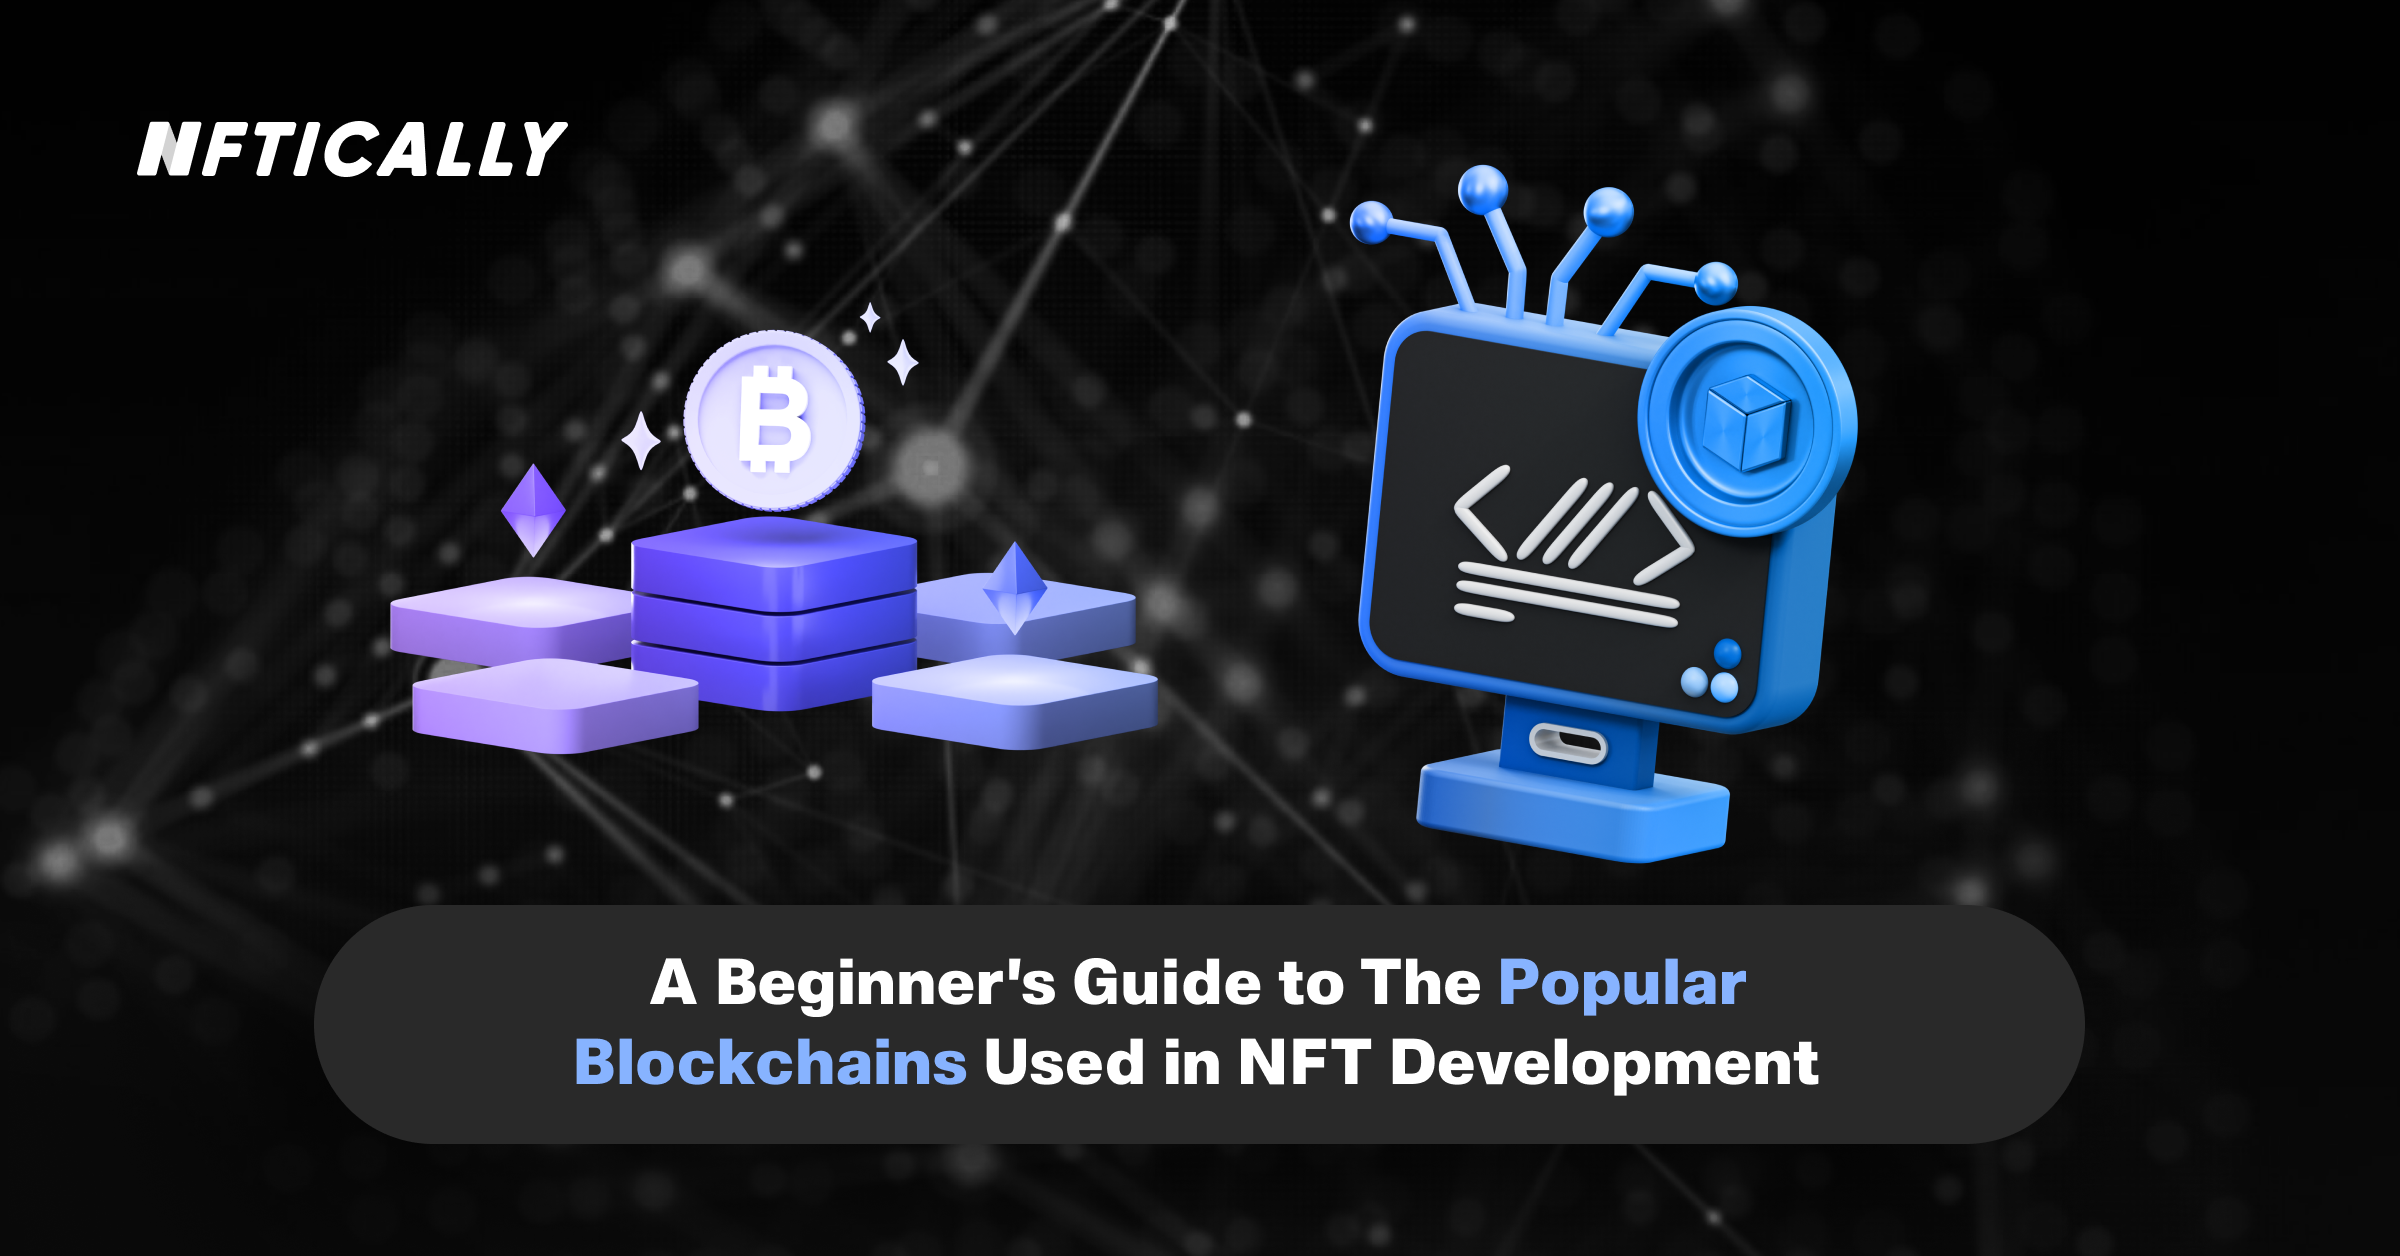 A Beginner?s Guide to The Popular Blockchains Used in NFT Development